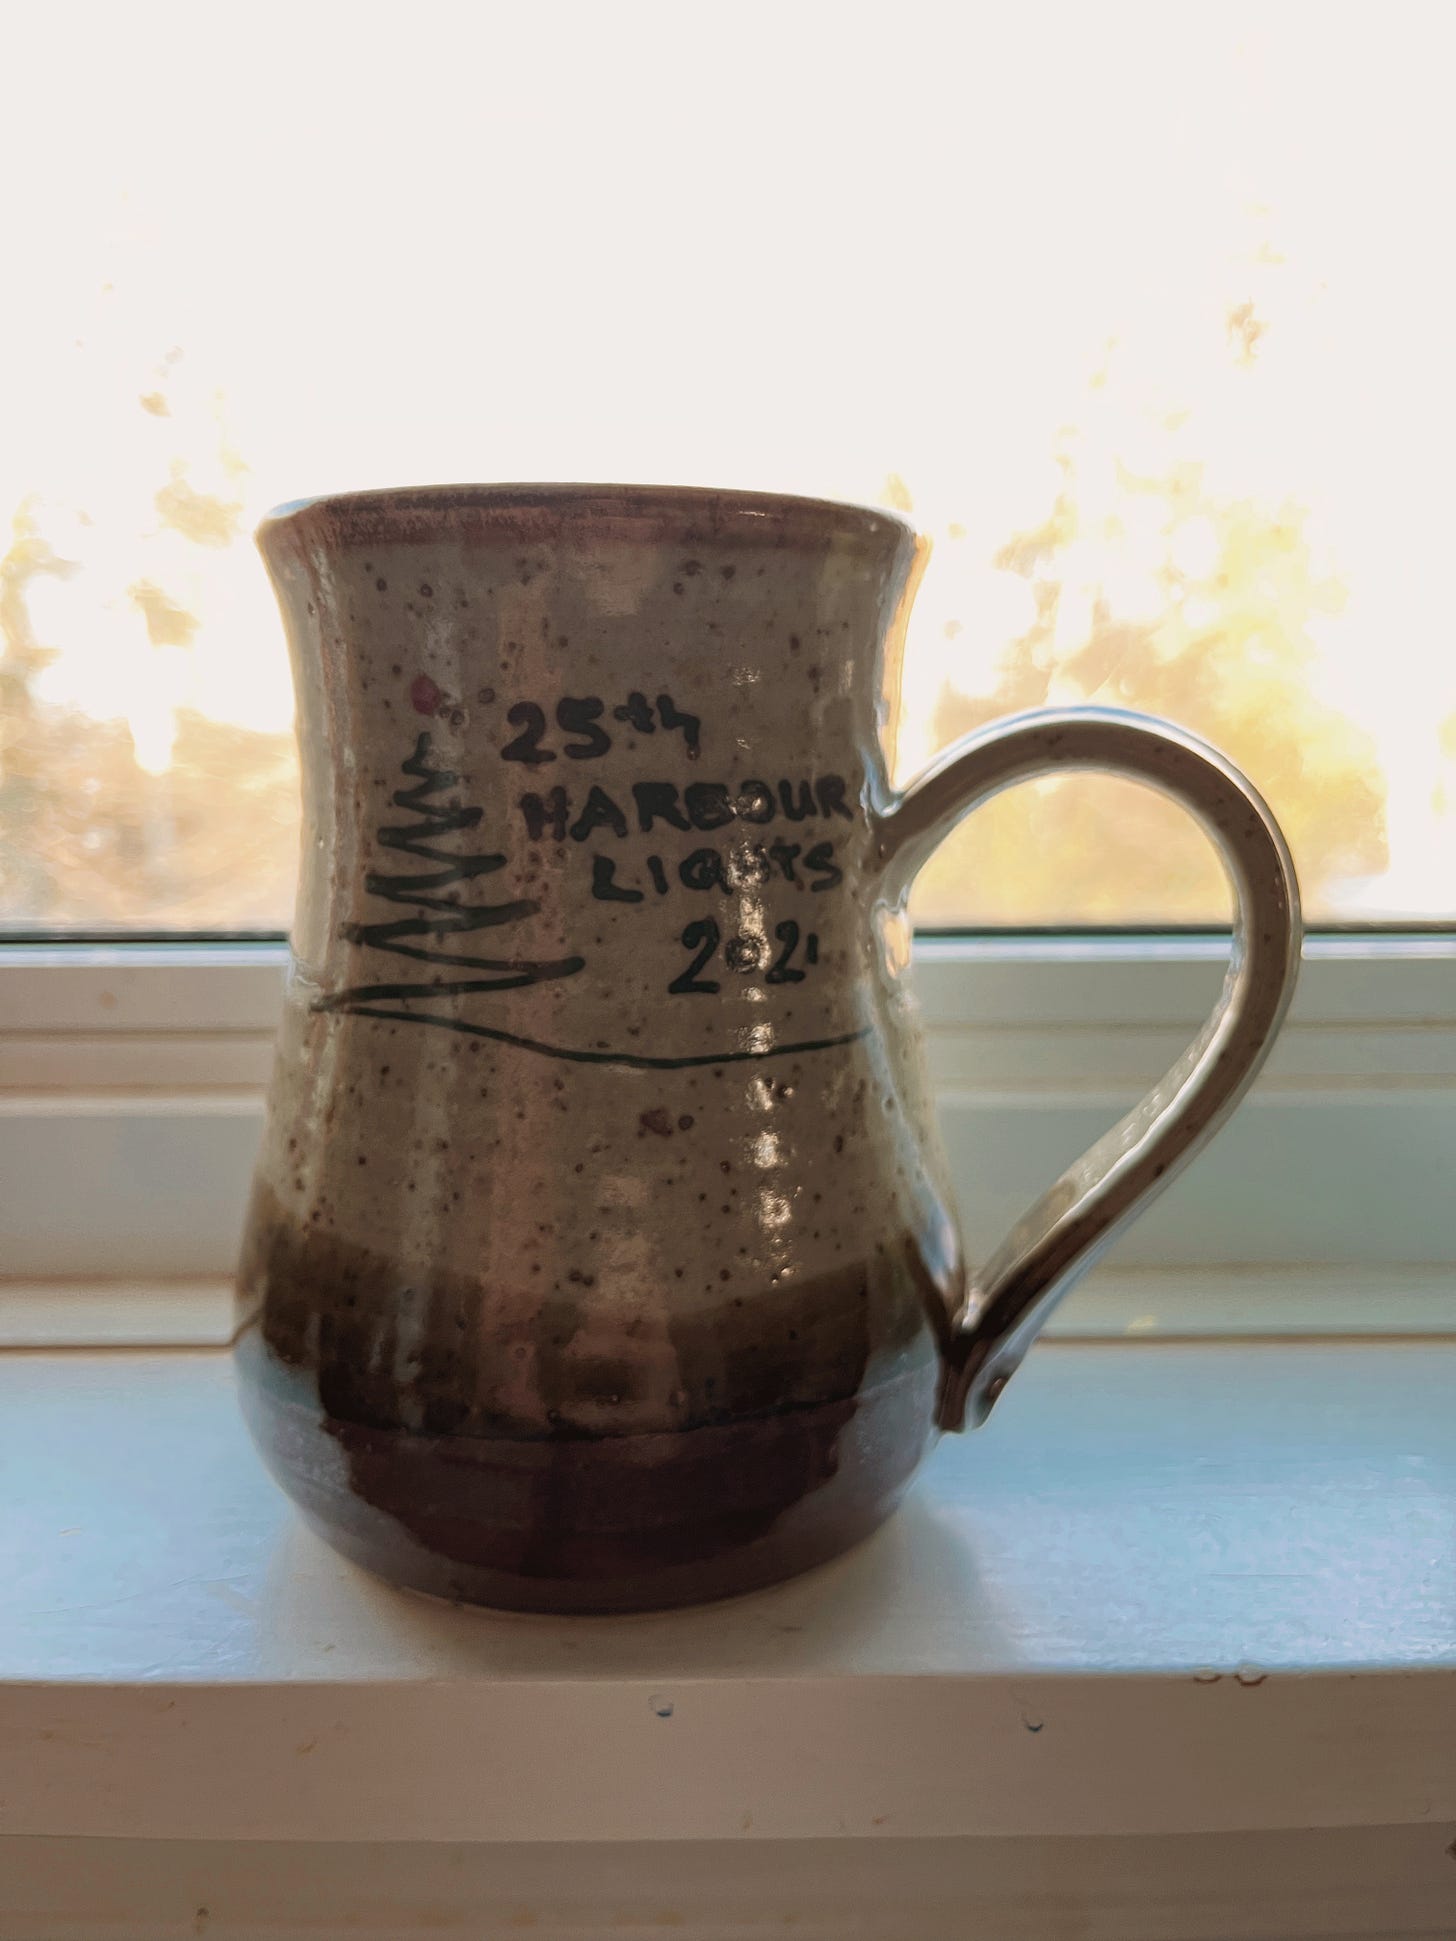 Tan and brown spotted pottery mug in front of a bright window. The words "25th Harbour Lights 2021" are written on the front of the mug.